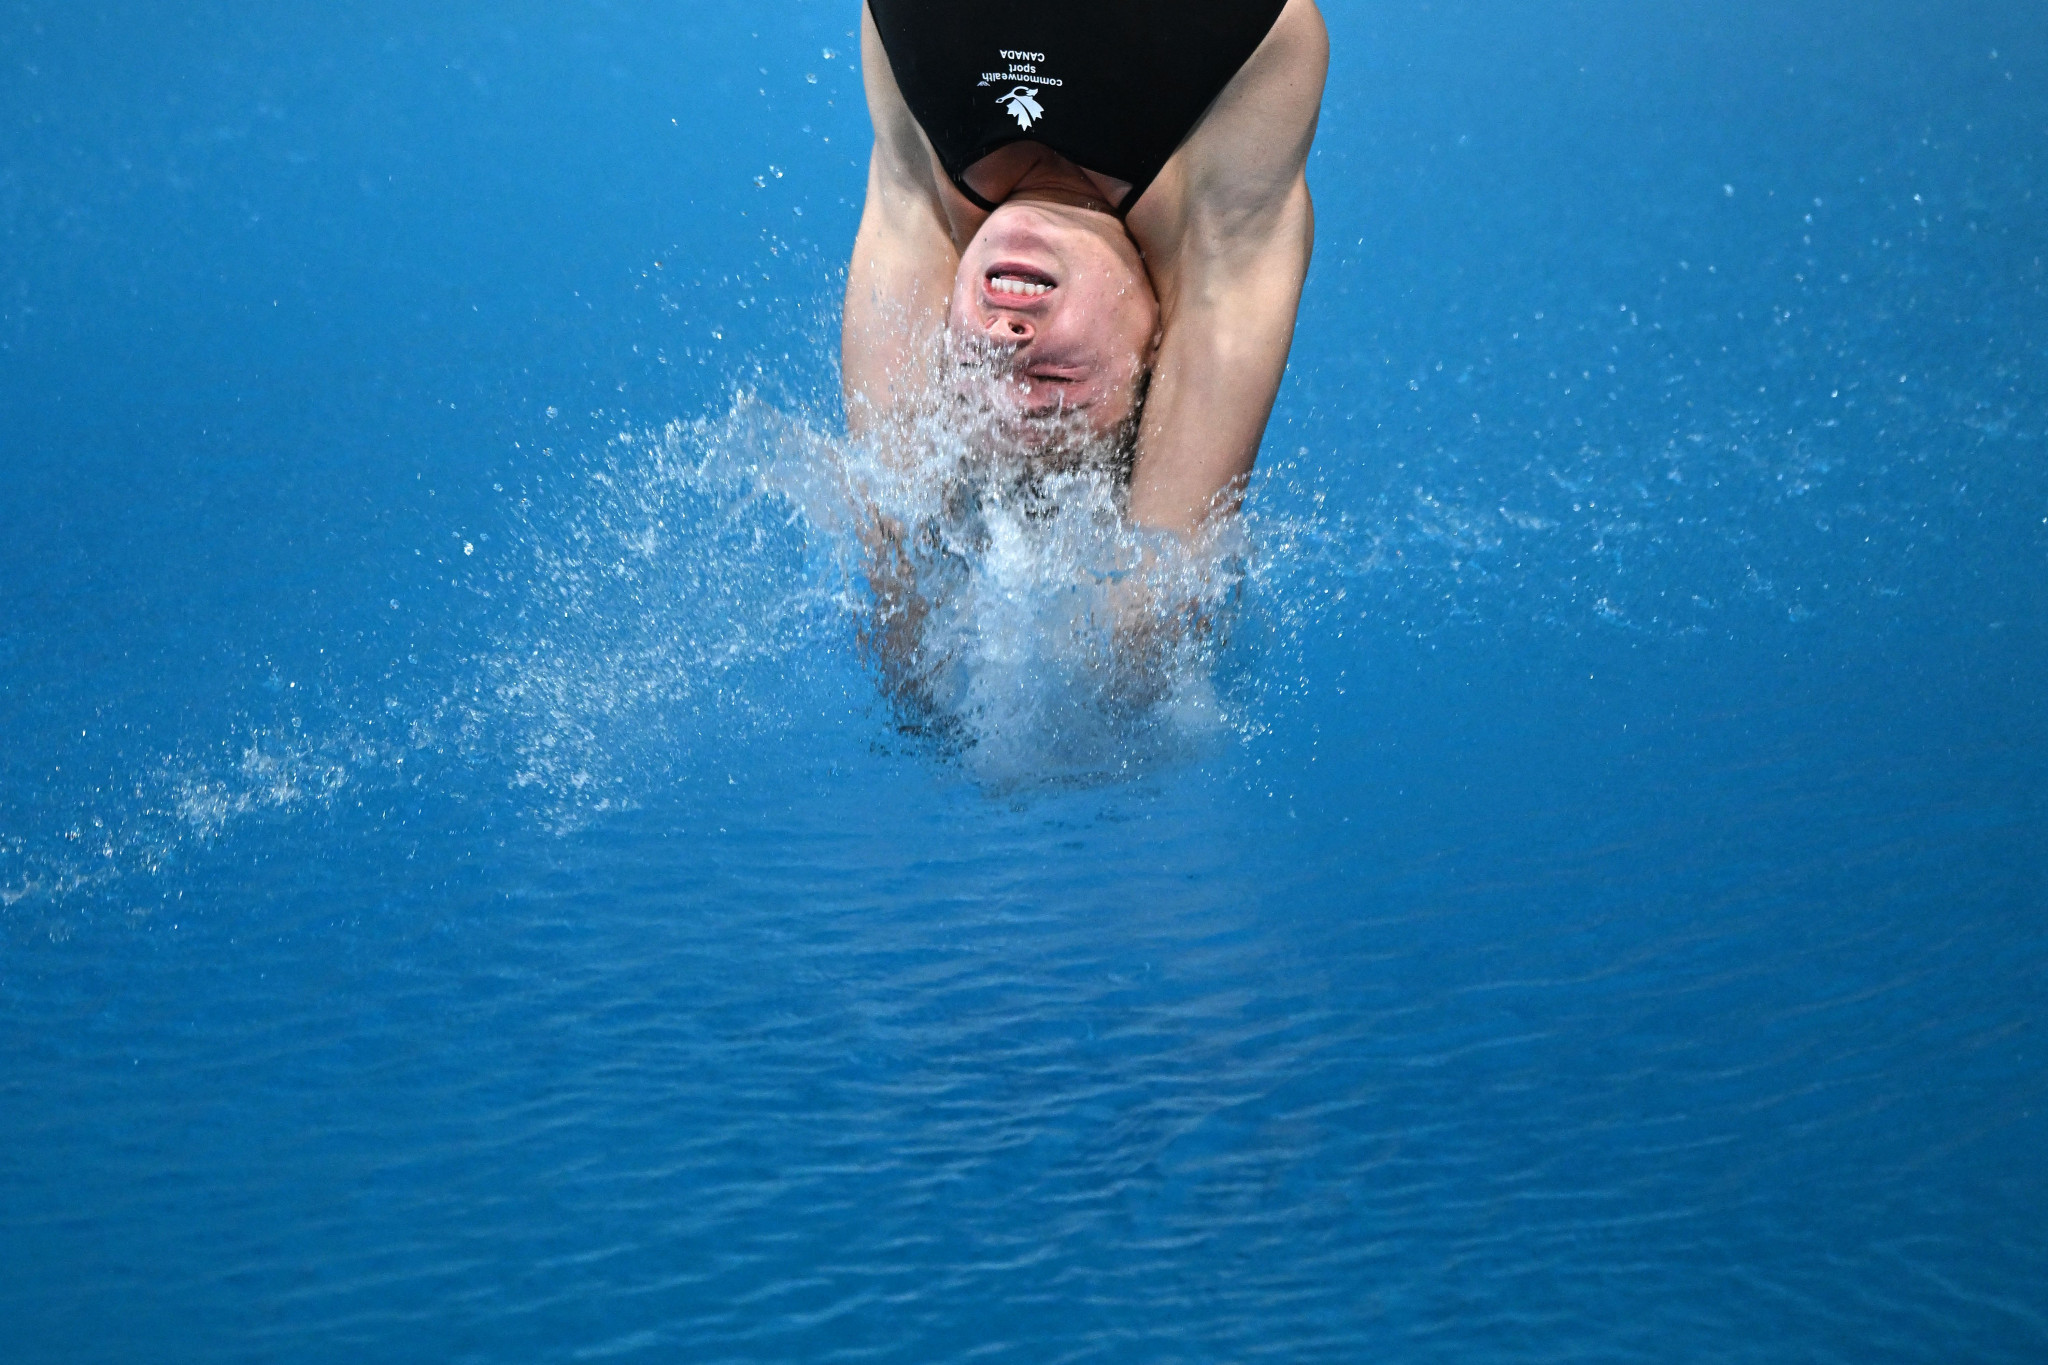 Canada's Mia Vallée won the women's 1m springboard final by more than 12 points ©Getty Images